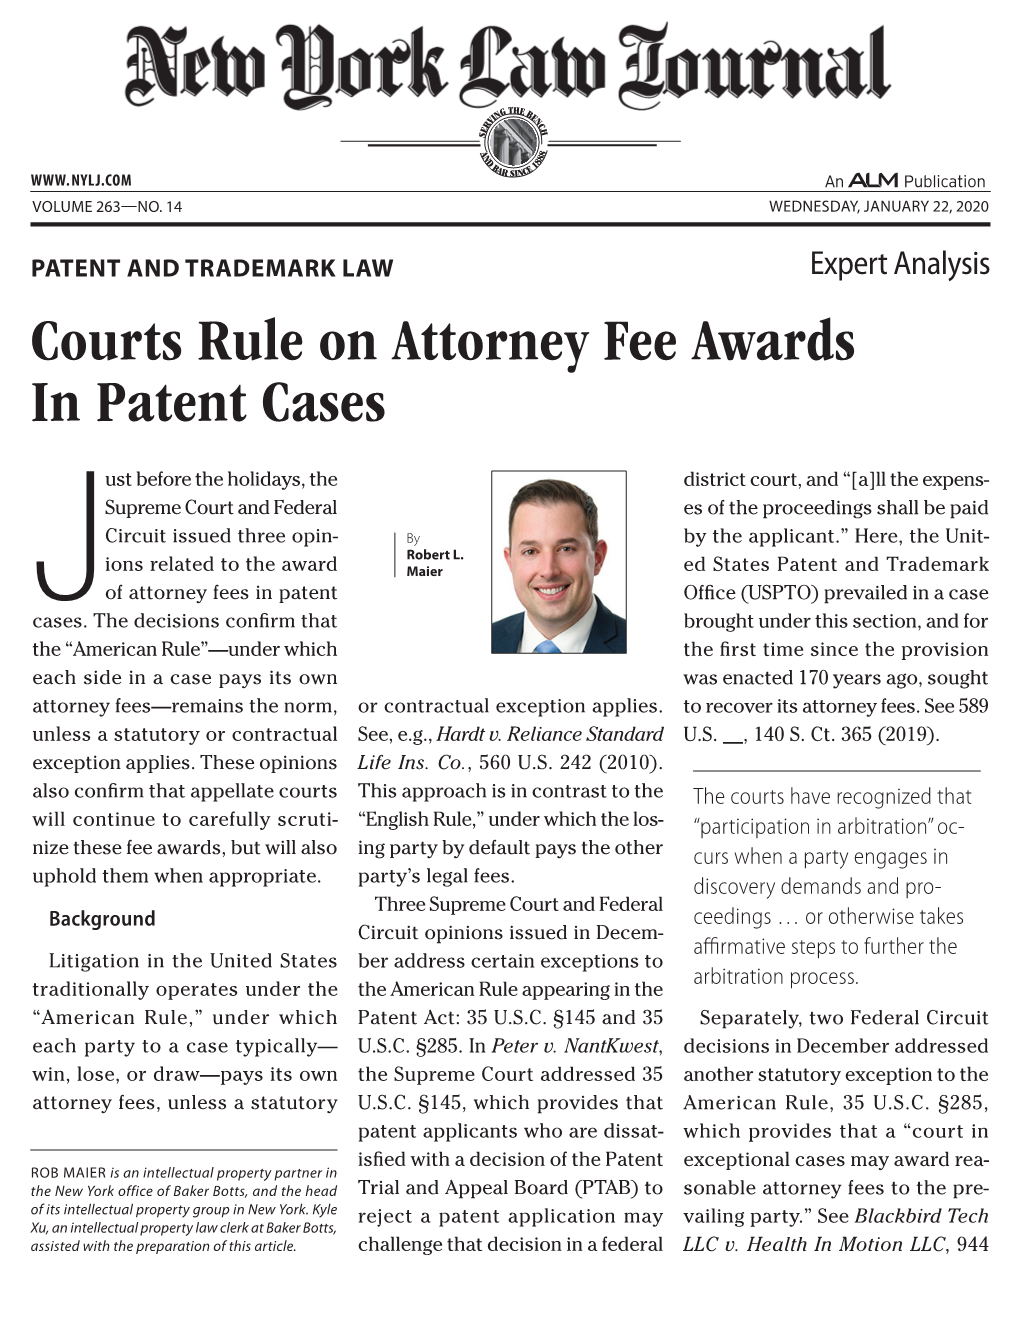 Courts Rule on Attorney Fee Awards in Patent Cases